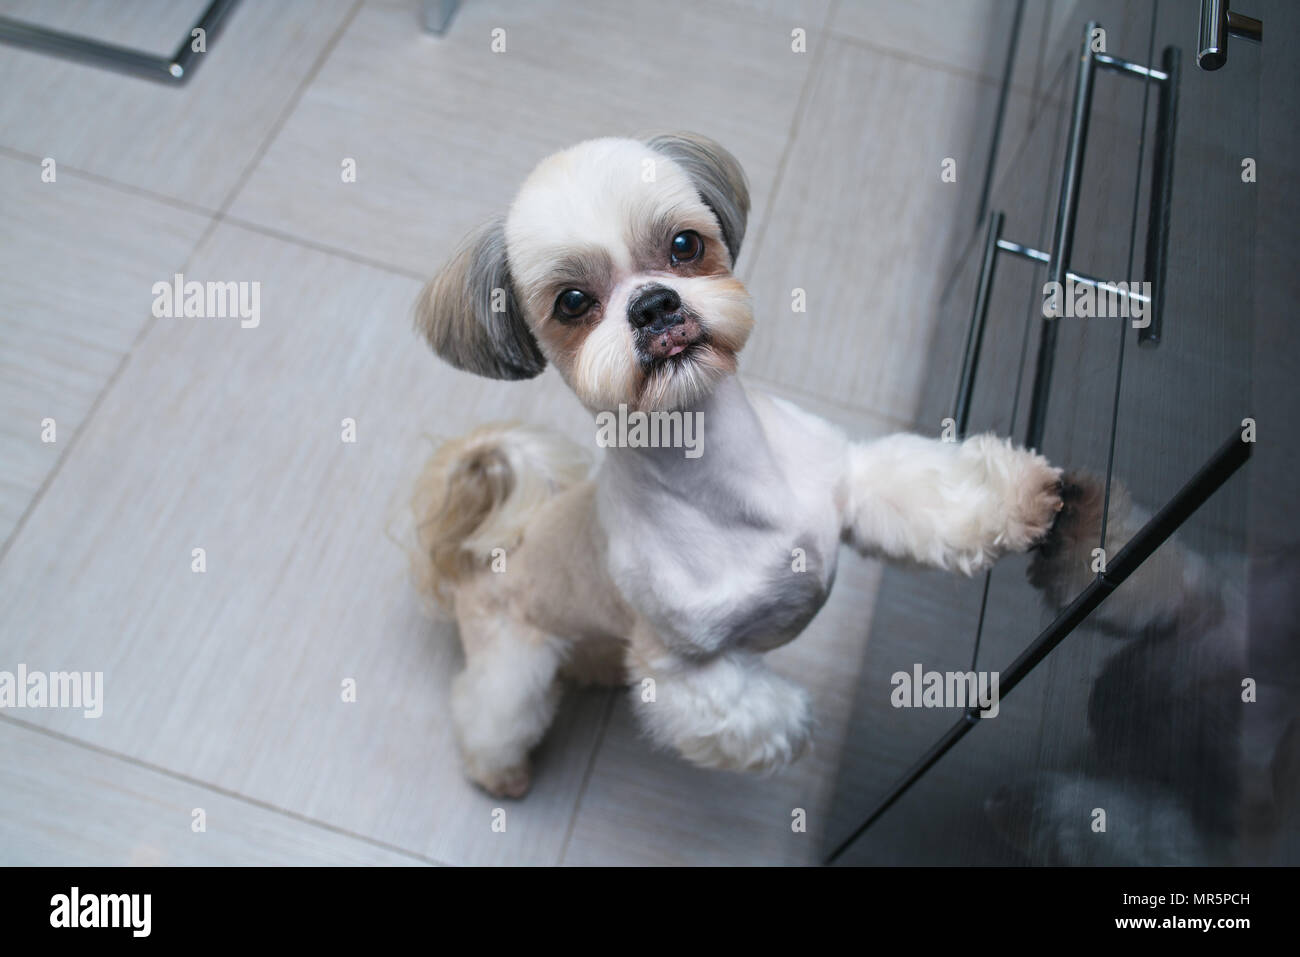 Shih tzu dog standing at kitchen and asking owner something to eat Stock Photo